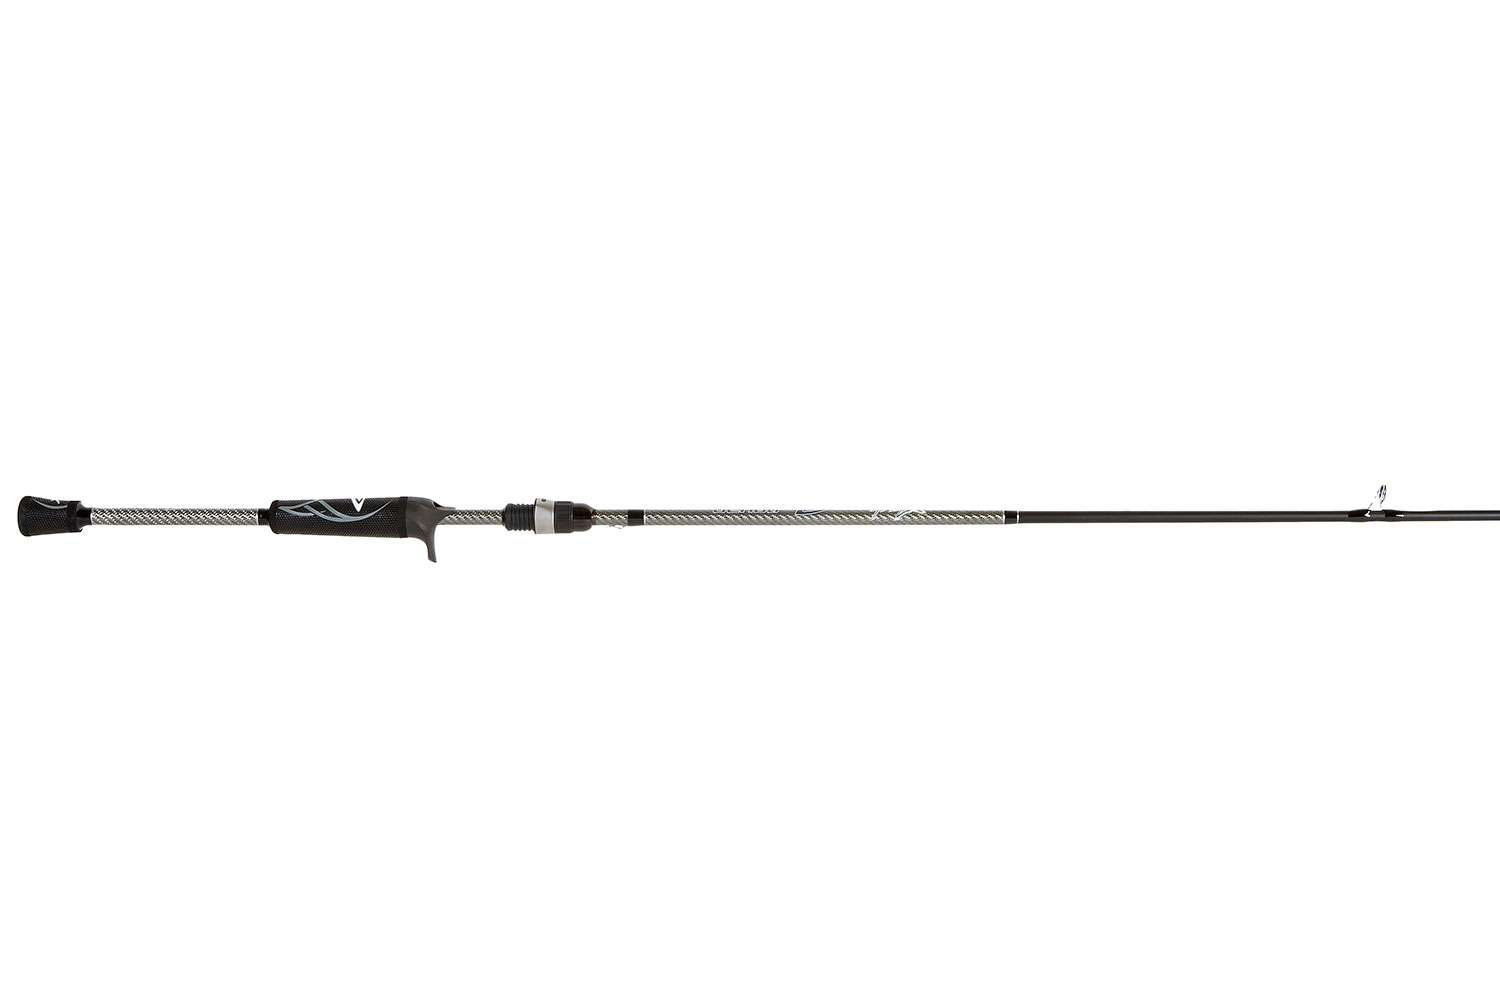 <p><b>Denali Attax, $119</b></p> The Denali proprietary Interloc Blank Technology delivers unbelievable sensitivity, uncompromised strength and weight reduction for this new rod. Attaxâs are wrapped with standard size, stainless steel guides to protect the ceramic inserts and feature Winn Grips for maximum comfort. Winn has established a new standard in grips to provide a tackier and more comfortable grip than traditional cork or EVA.  All Attax Series rods have a three-year warranty. <br> <a href=